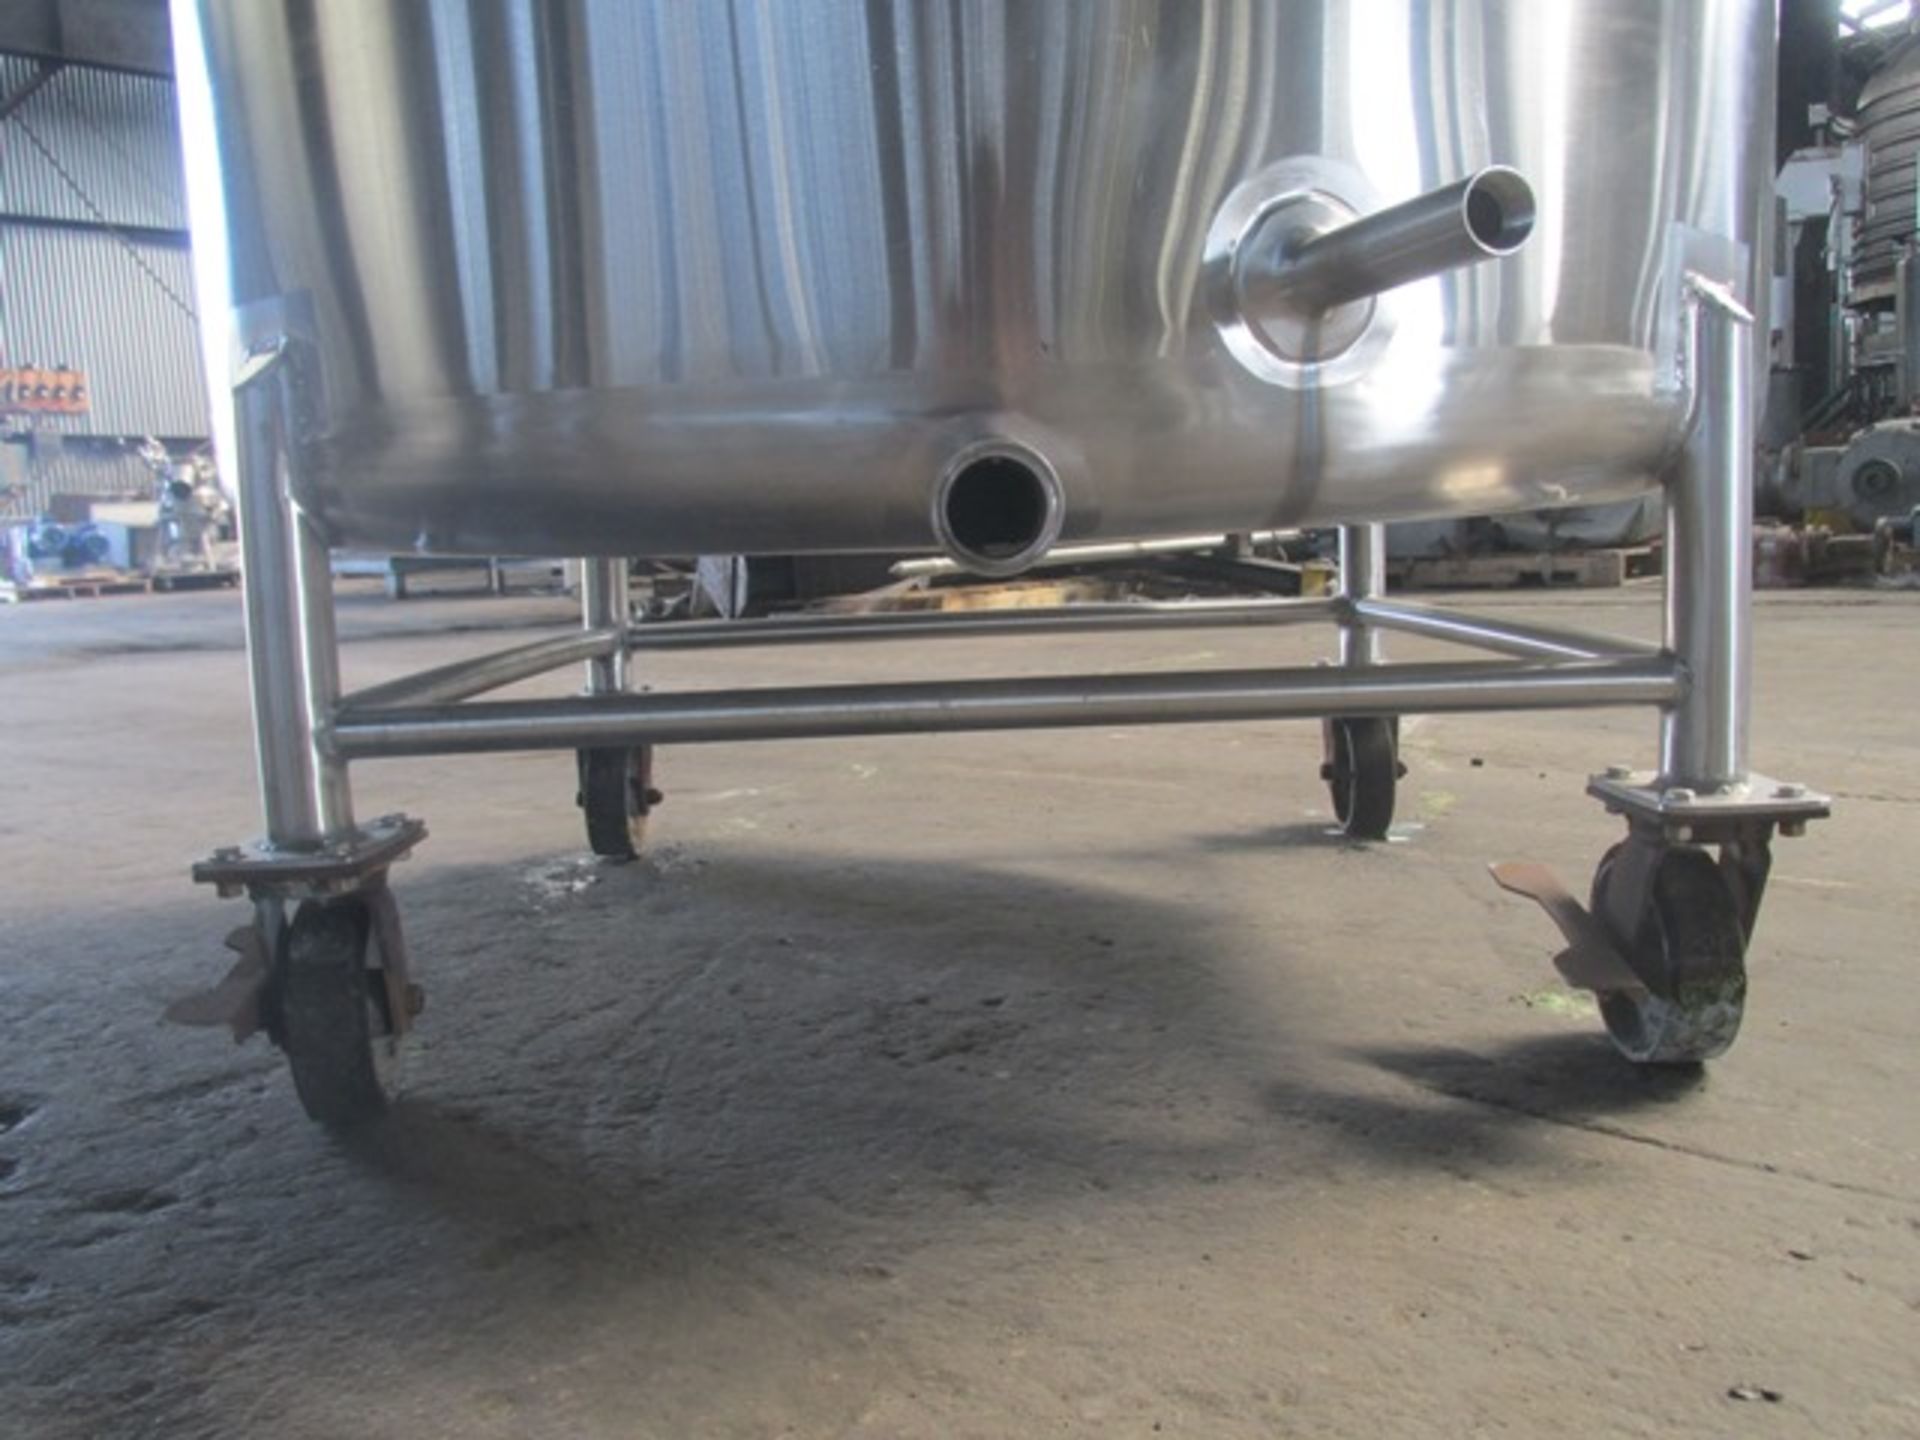 250 gallon CherryBurrell mix tank, stainless steel construction, 48" diameter x 36" straight sides - Image 9 of 9